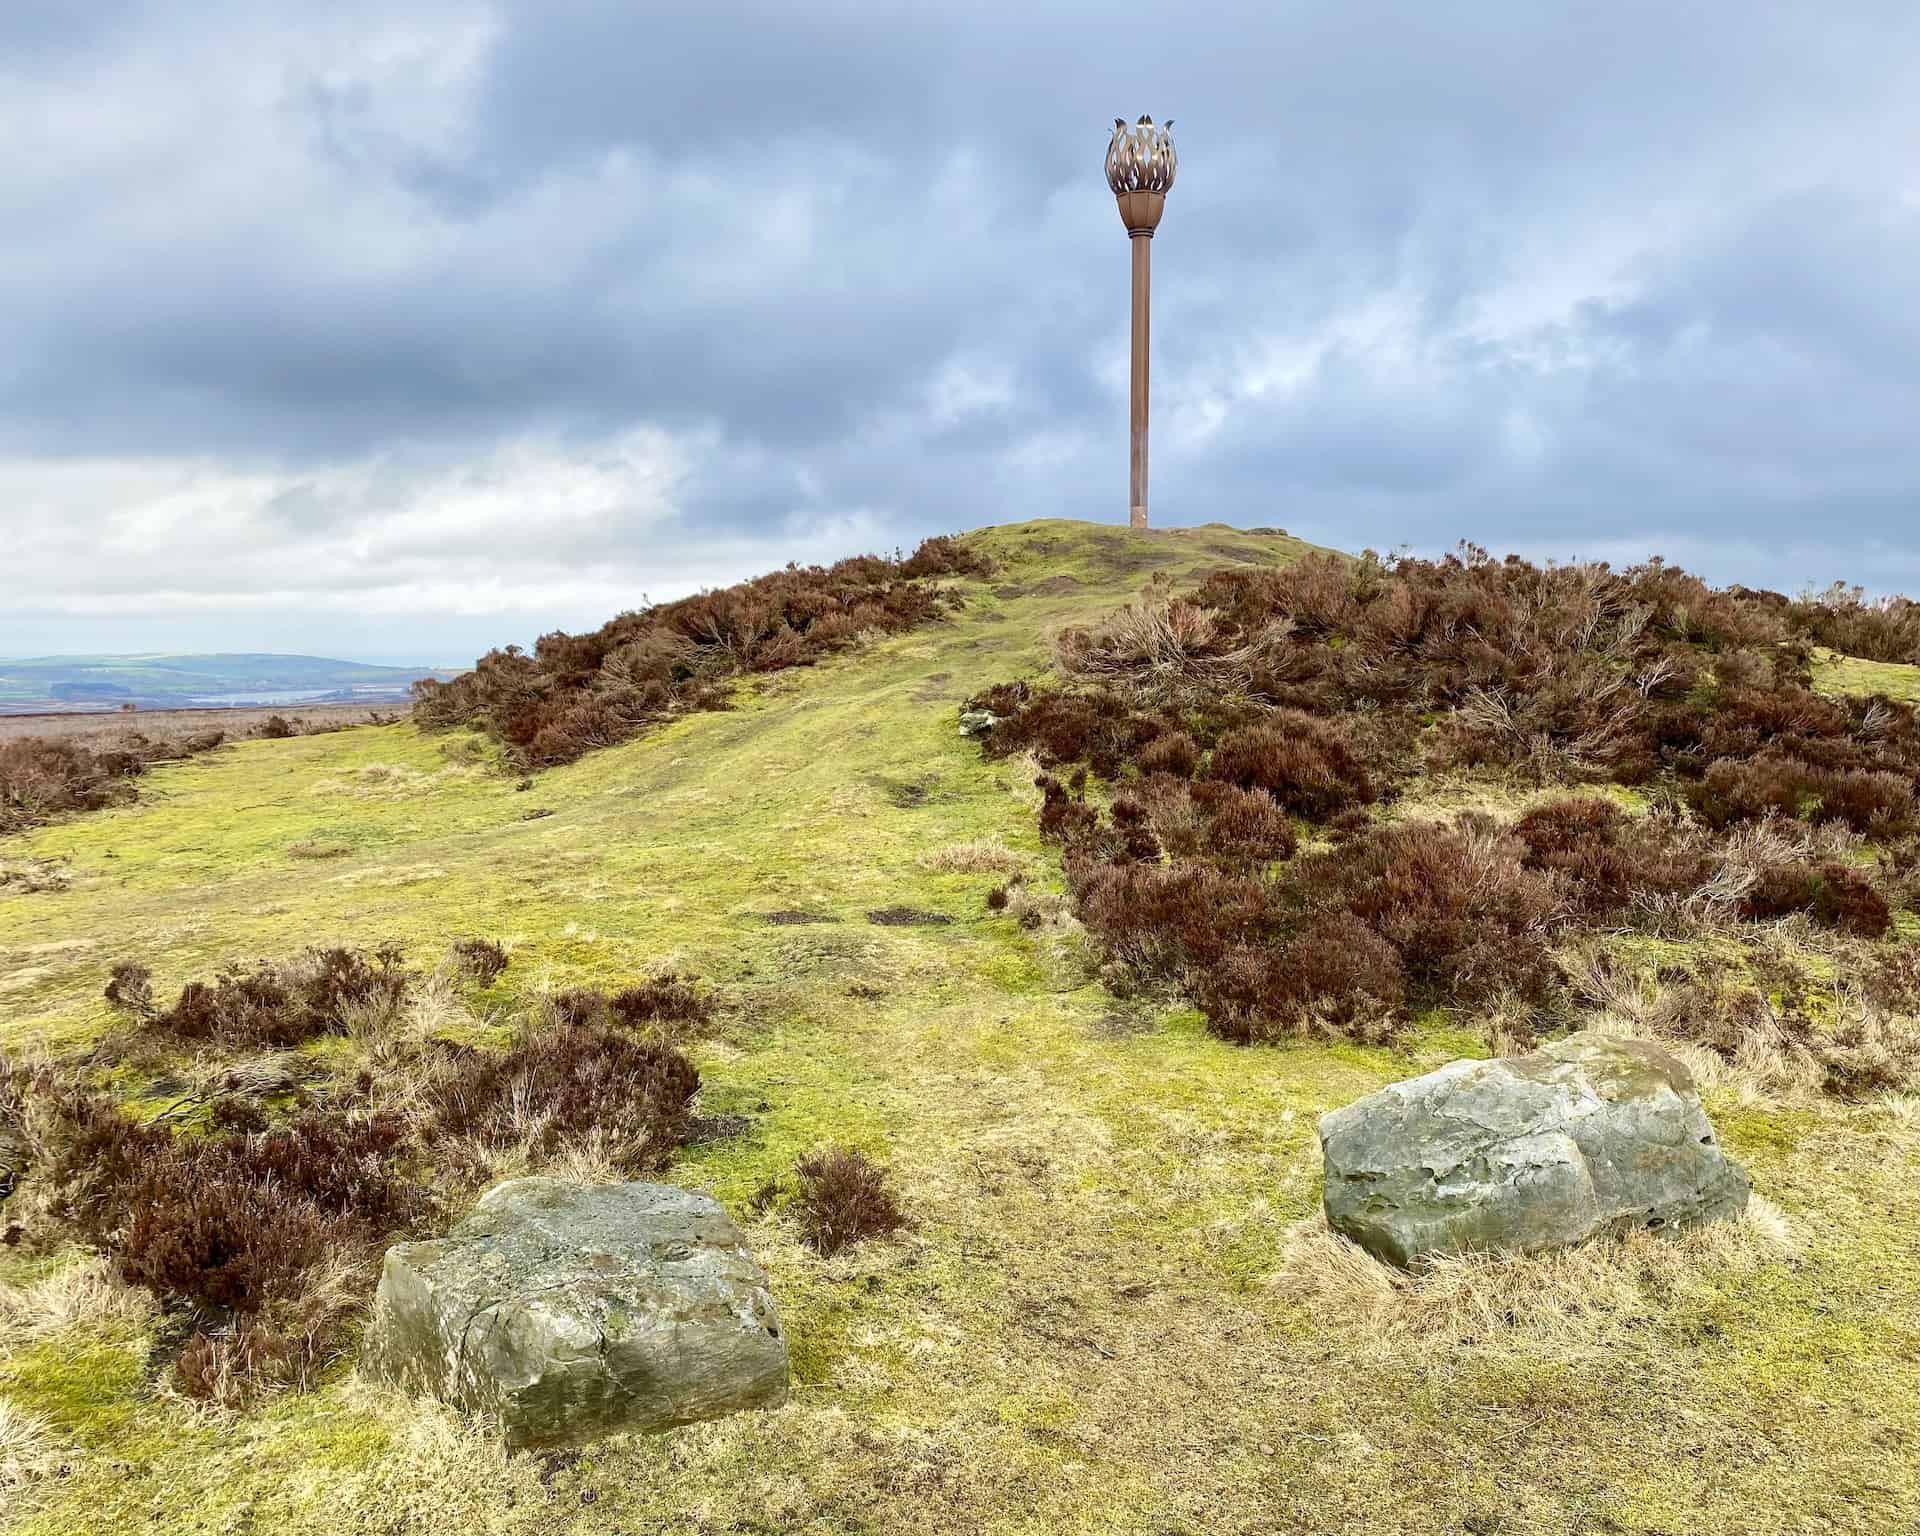 On Beacon Hill in the scenic North York Moors in North Yorkshire, Danby Beacon stands as a testament to England's rich and diverse history.